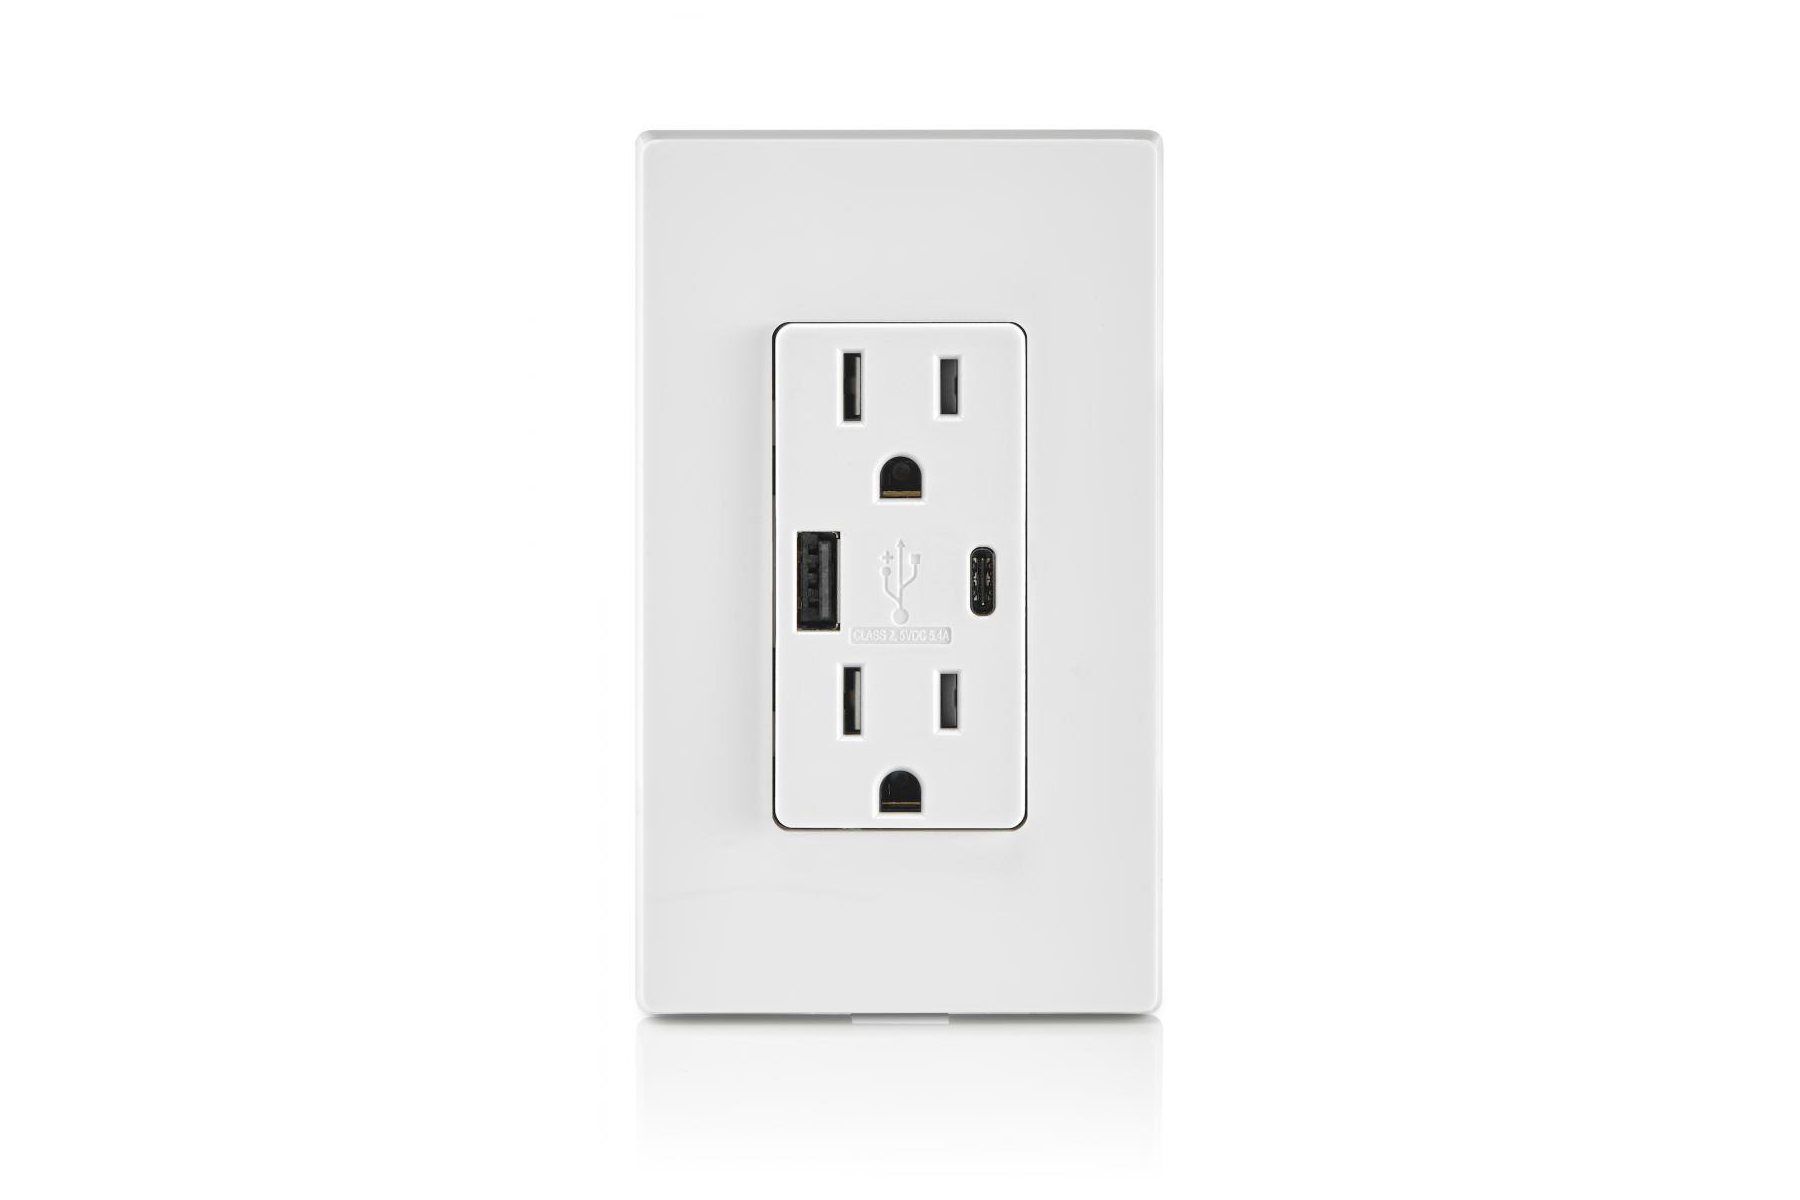 Leviton Introduces Outlet With Type A, Type-C USB Chargers | Residential Products Online